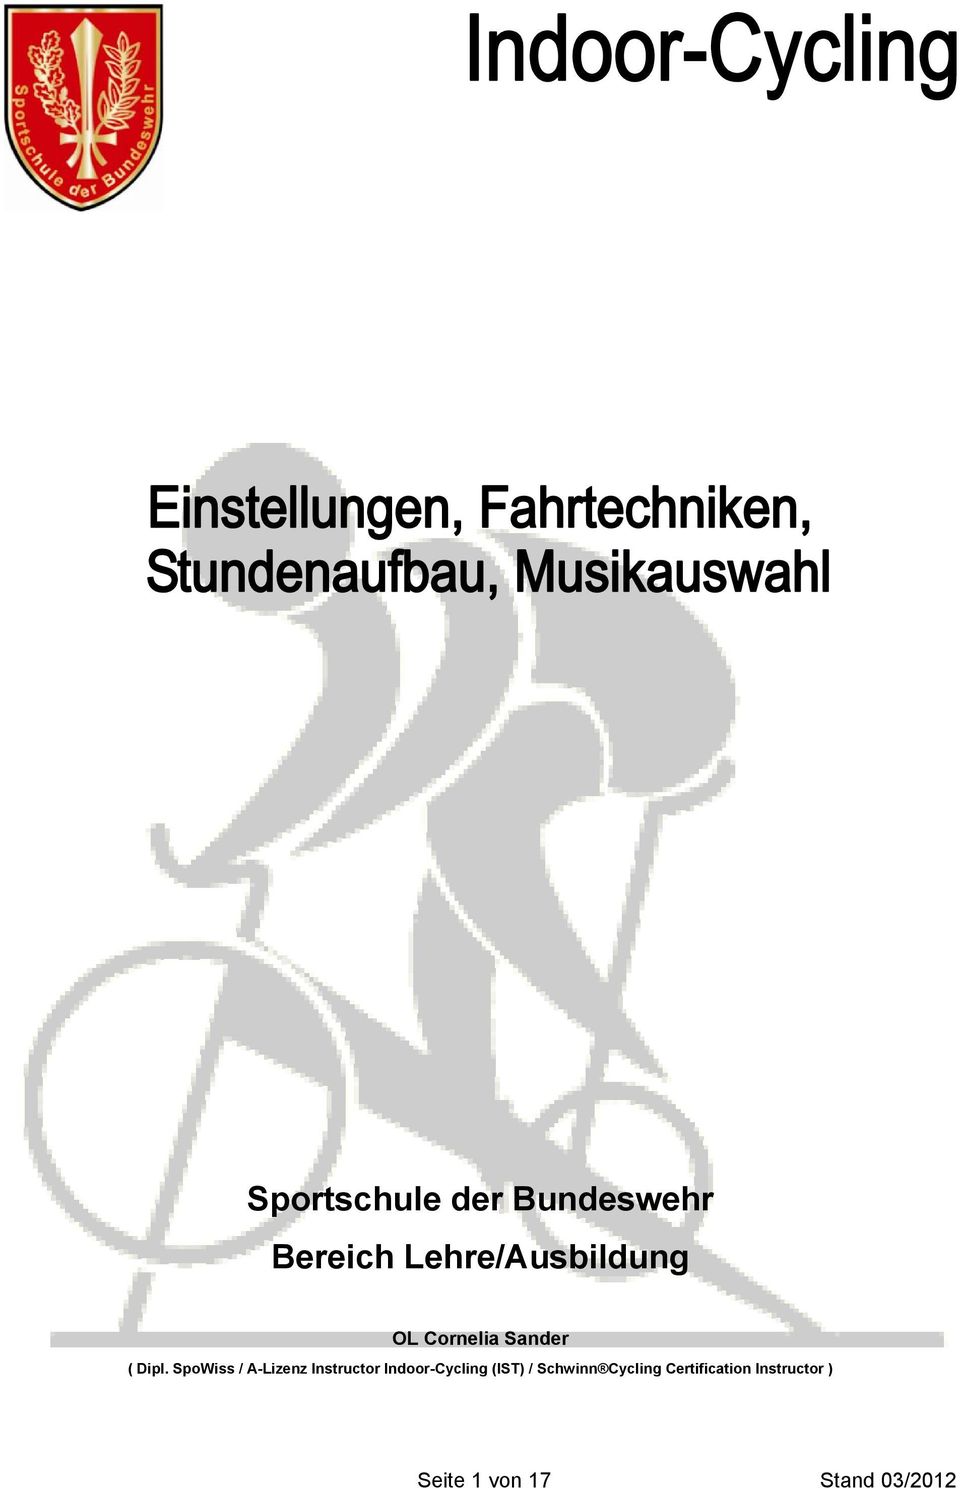 SpoWiss / A-Lizenz Instructor Indoor-Cycling (IST)